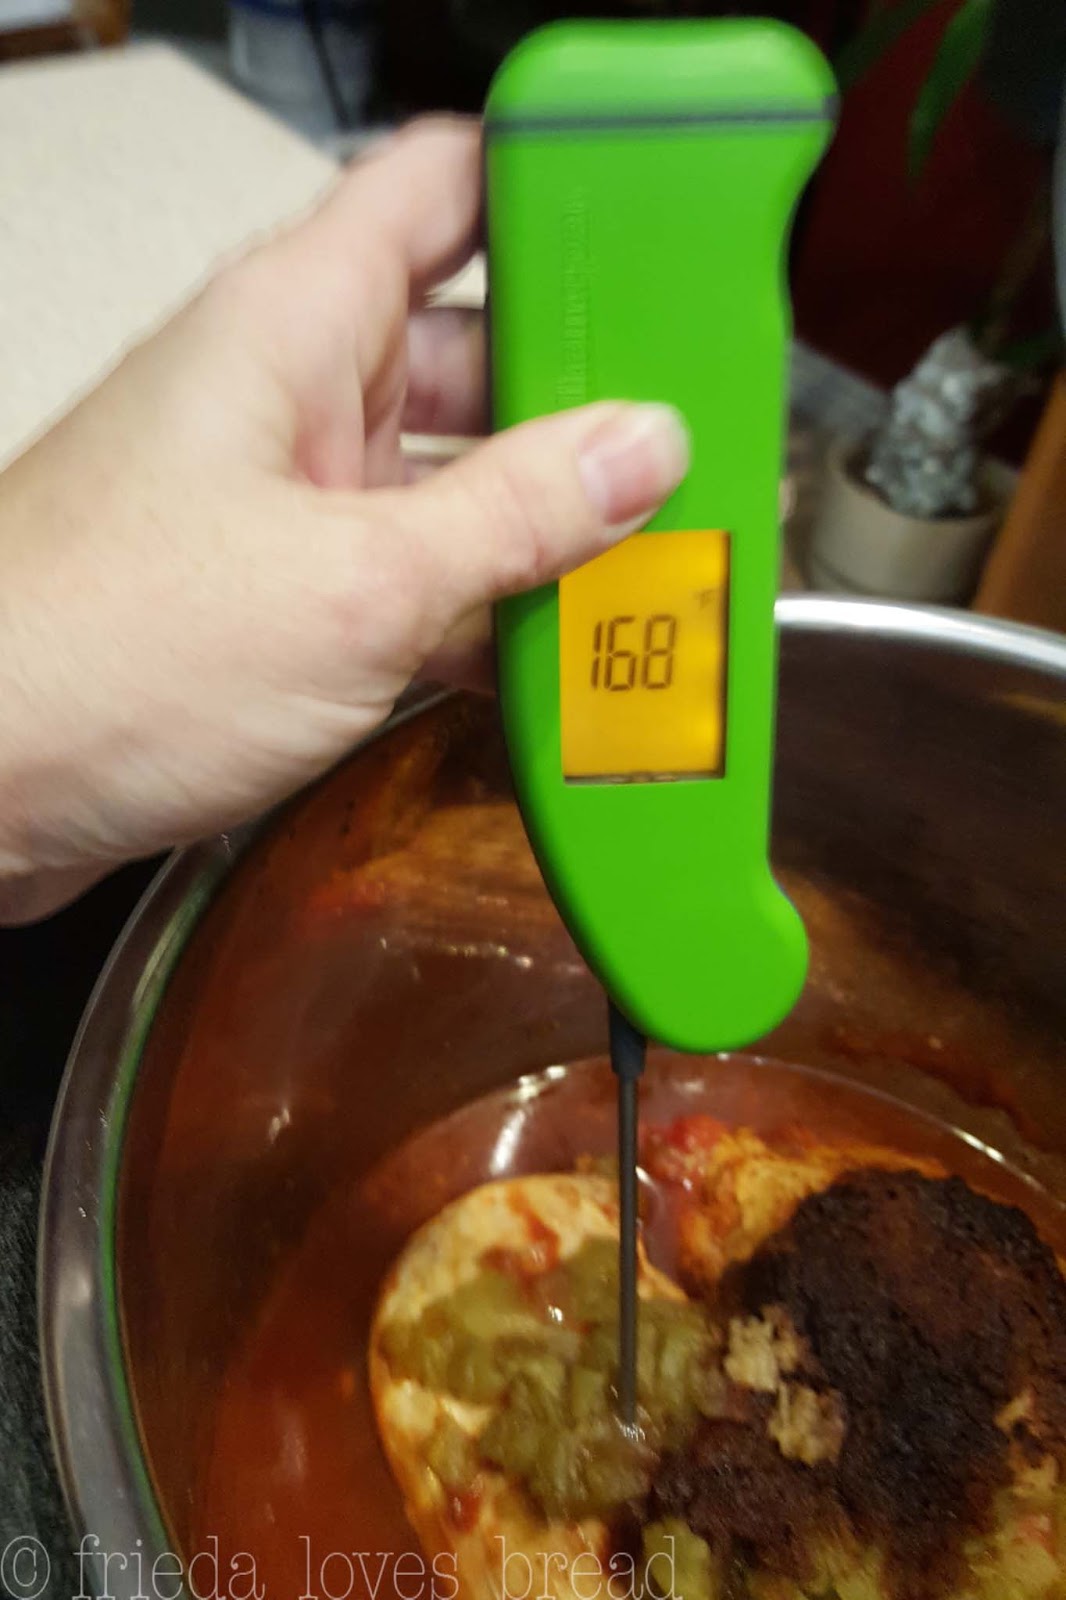  Digital Kitchen Thermometer for Bread, Candy, Yogurt